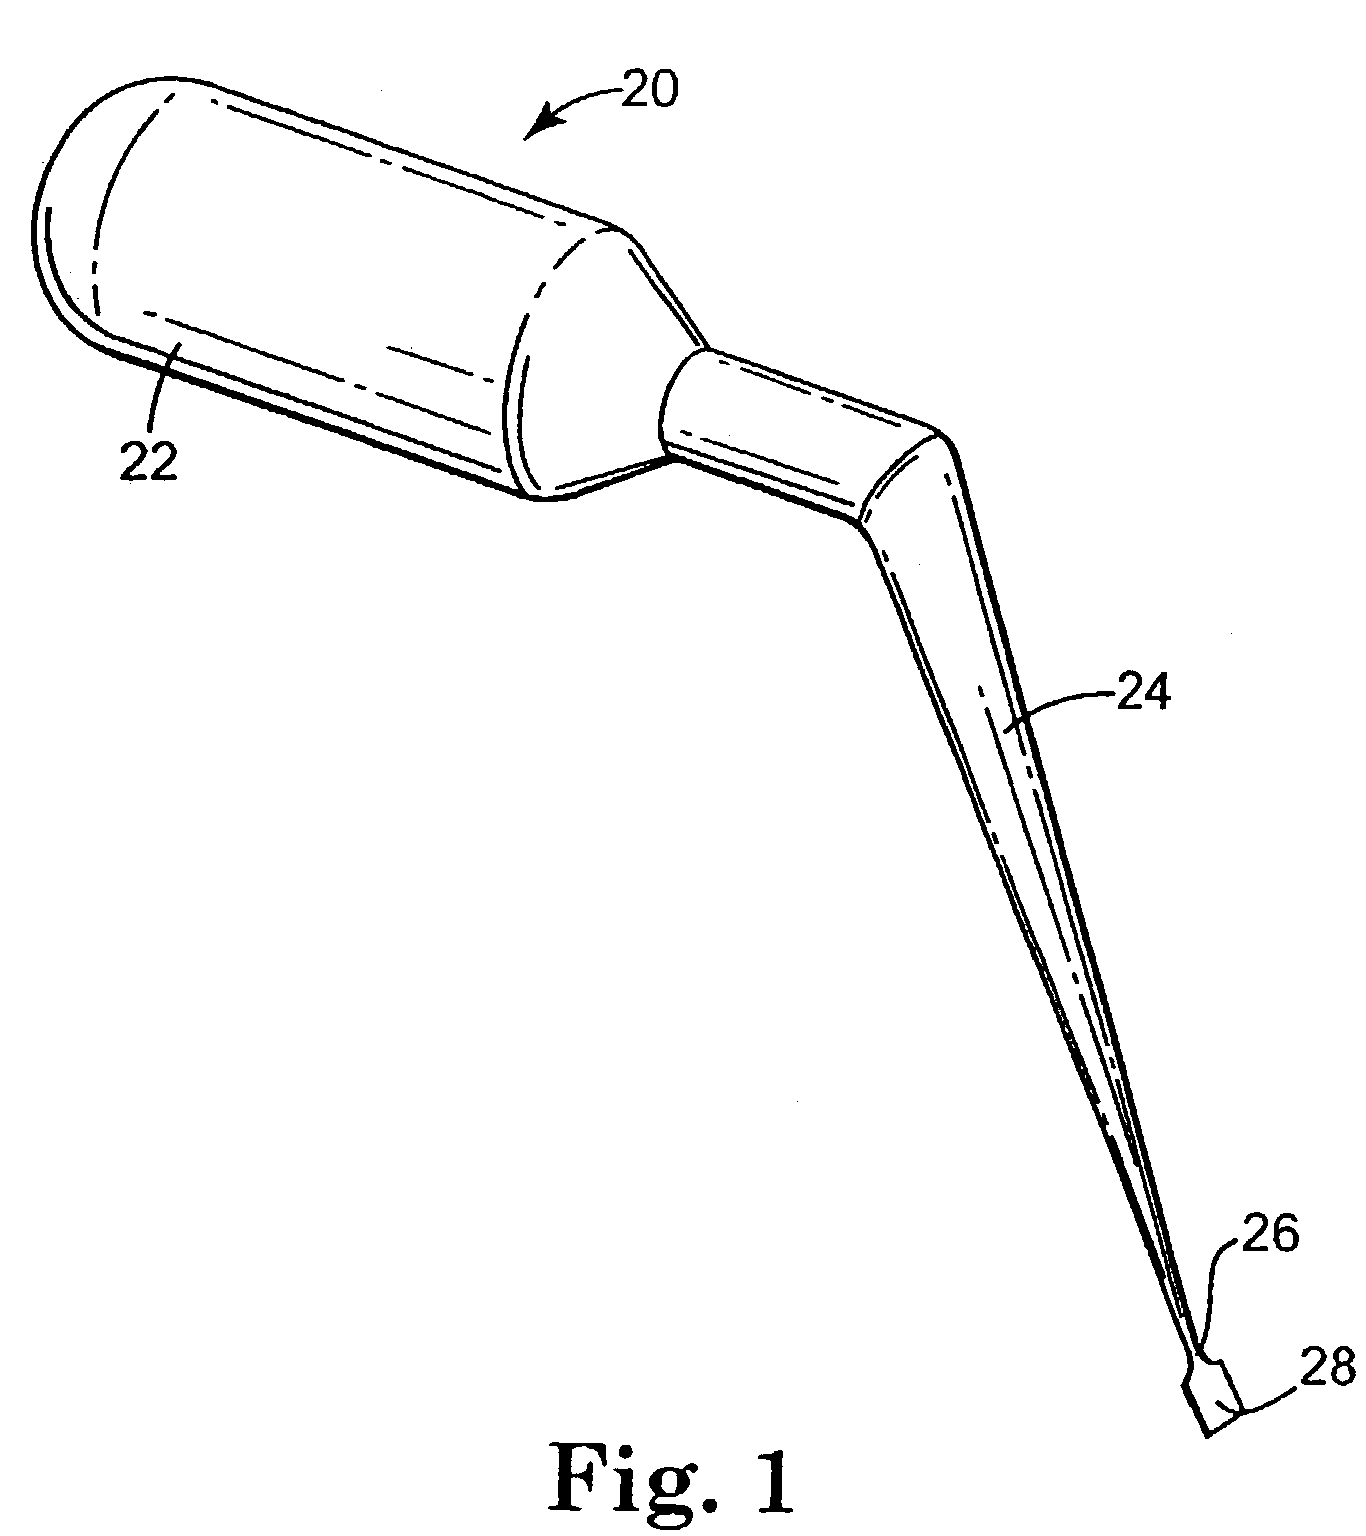 Compositions and methods of treatment to alleviate or prevent migrainous headaches and their associated symptoms